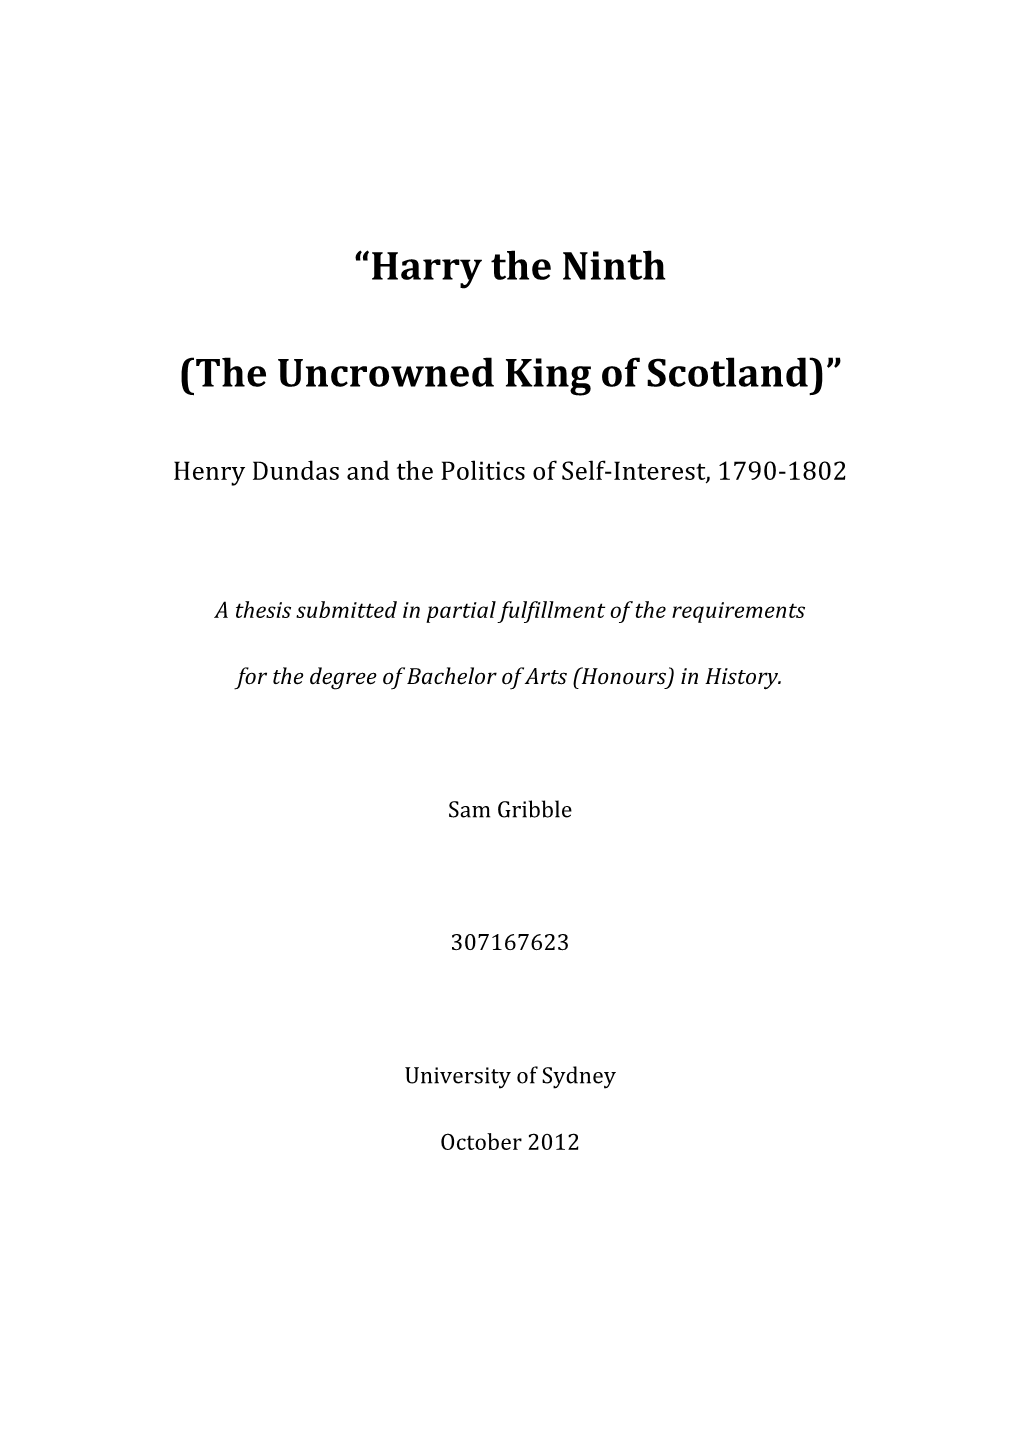 “Harry the Ninth (The Uncrowned King of Scotland)”